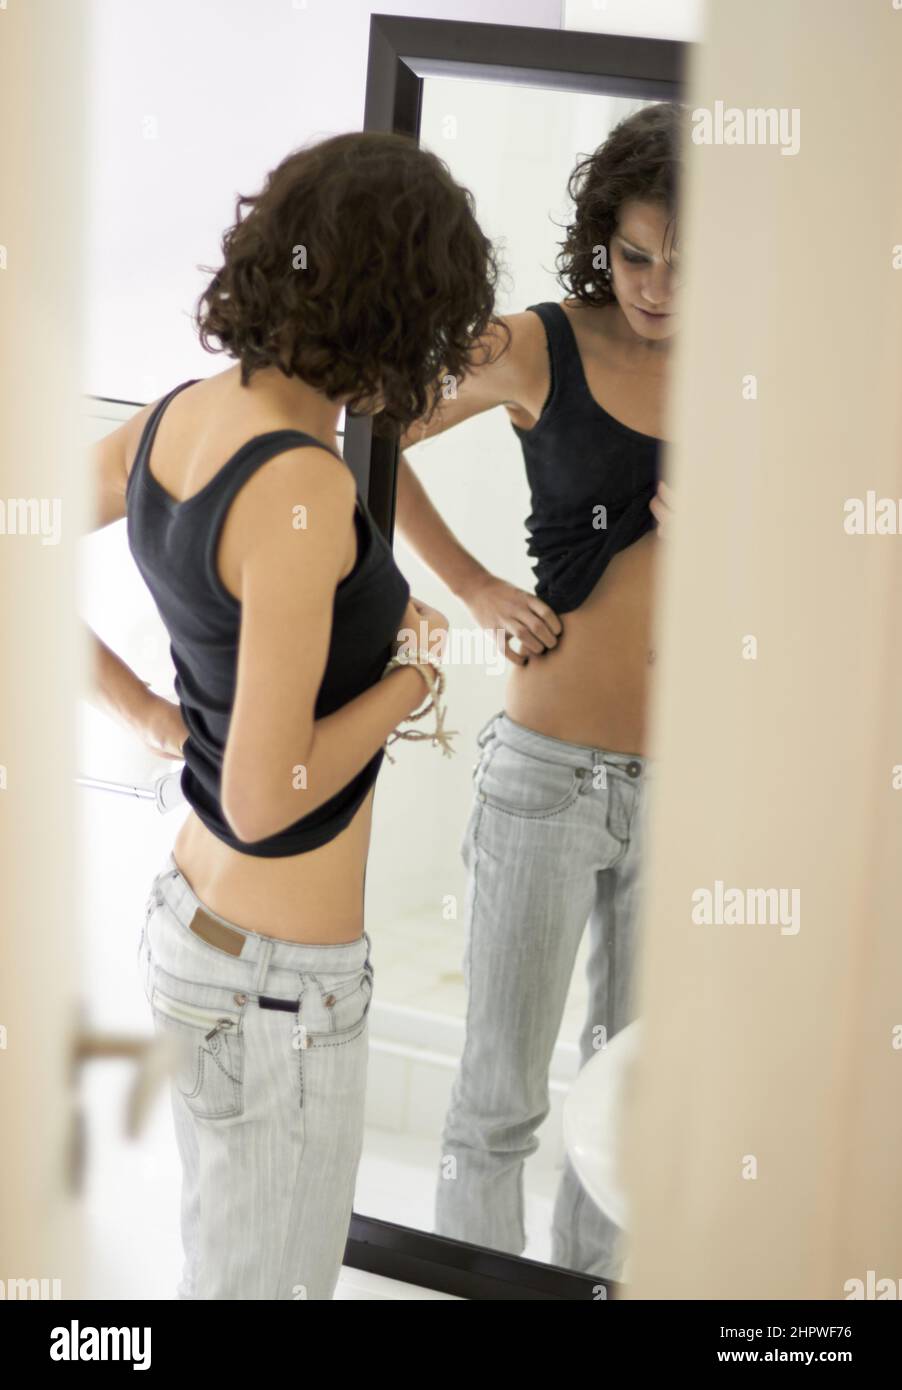 Shell never be skinny enough. A very skinny girl obsessing over her body  Stock Photo - Alamy